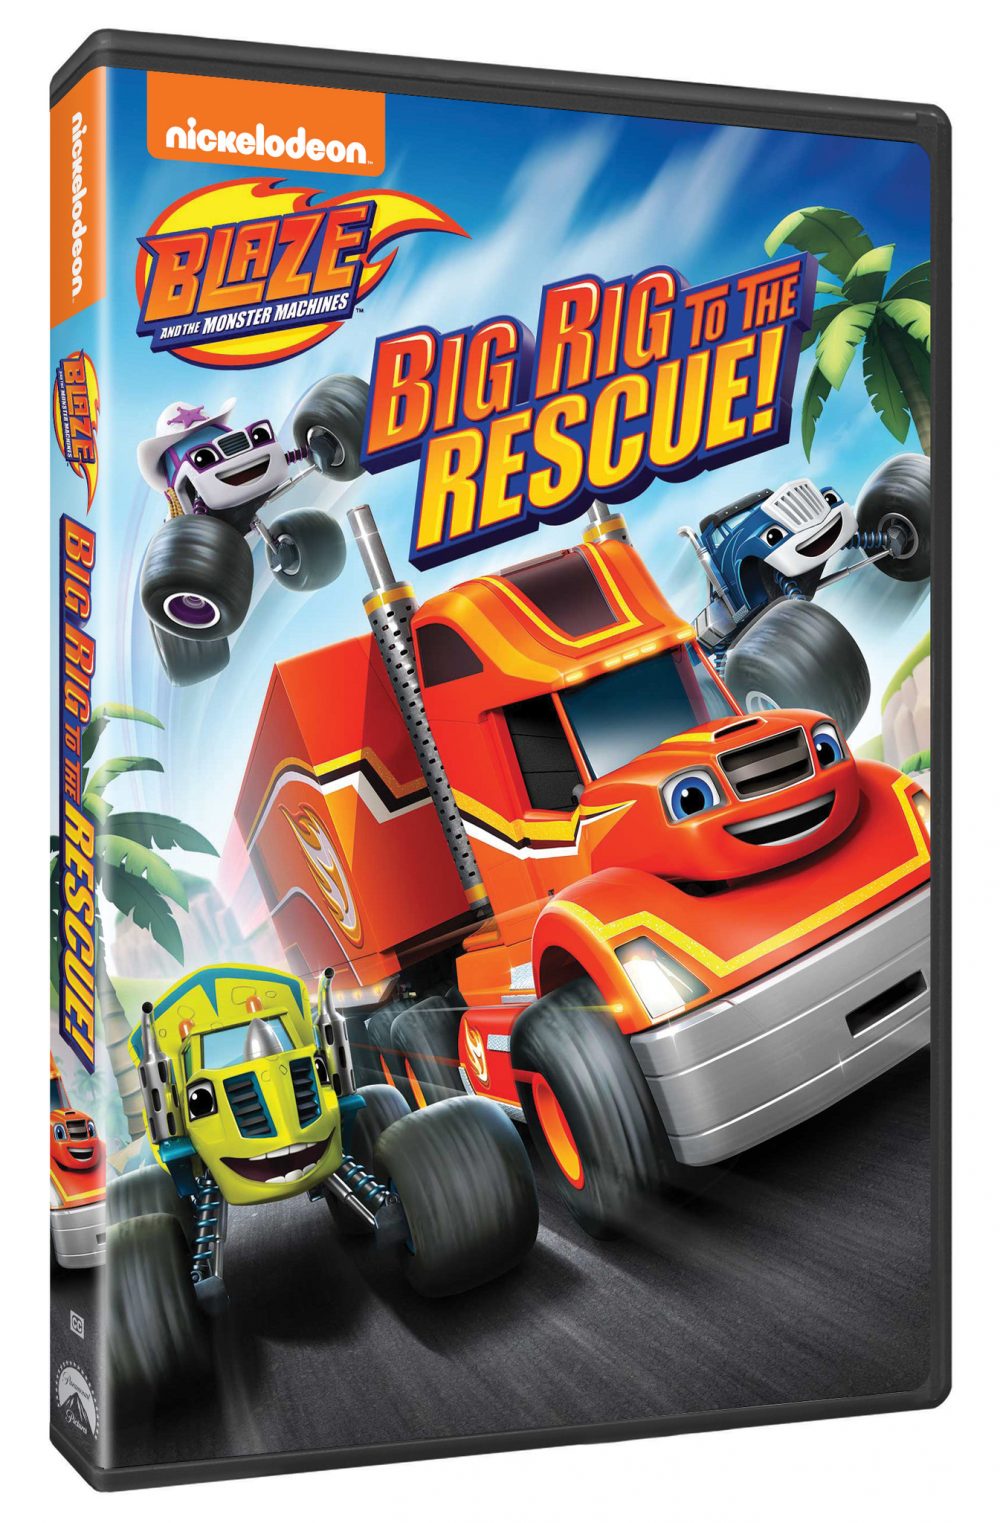 Get Blaze And The Monster Machines: Big Rig To The Rescue on DVD on Oct 4!